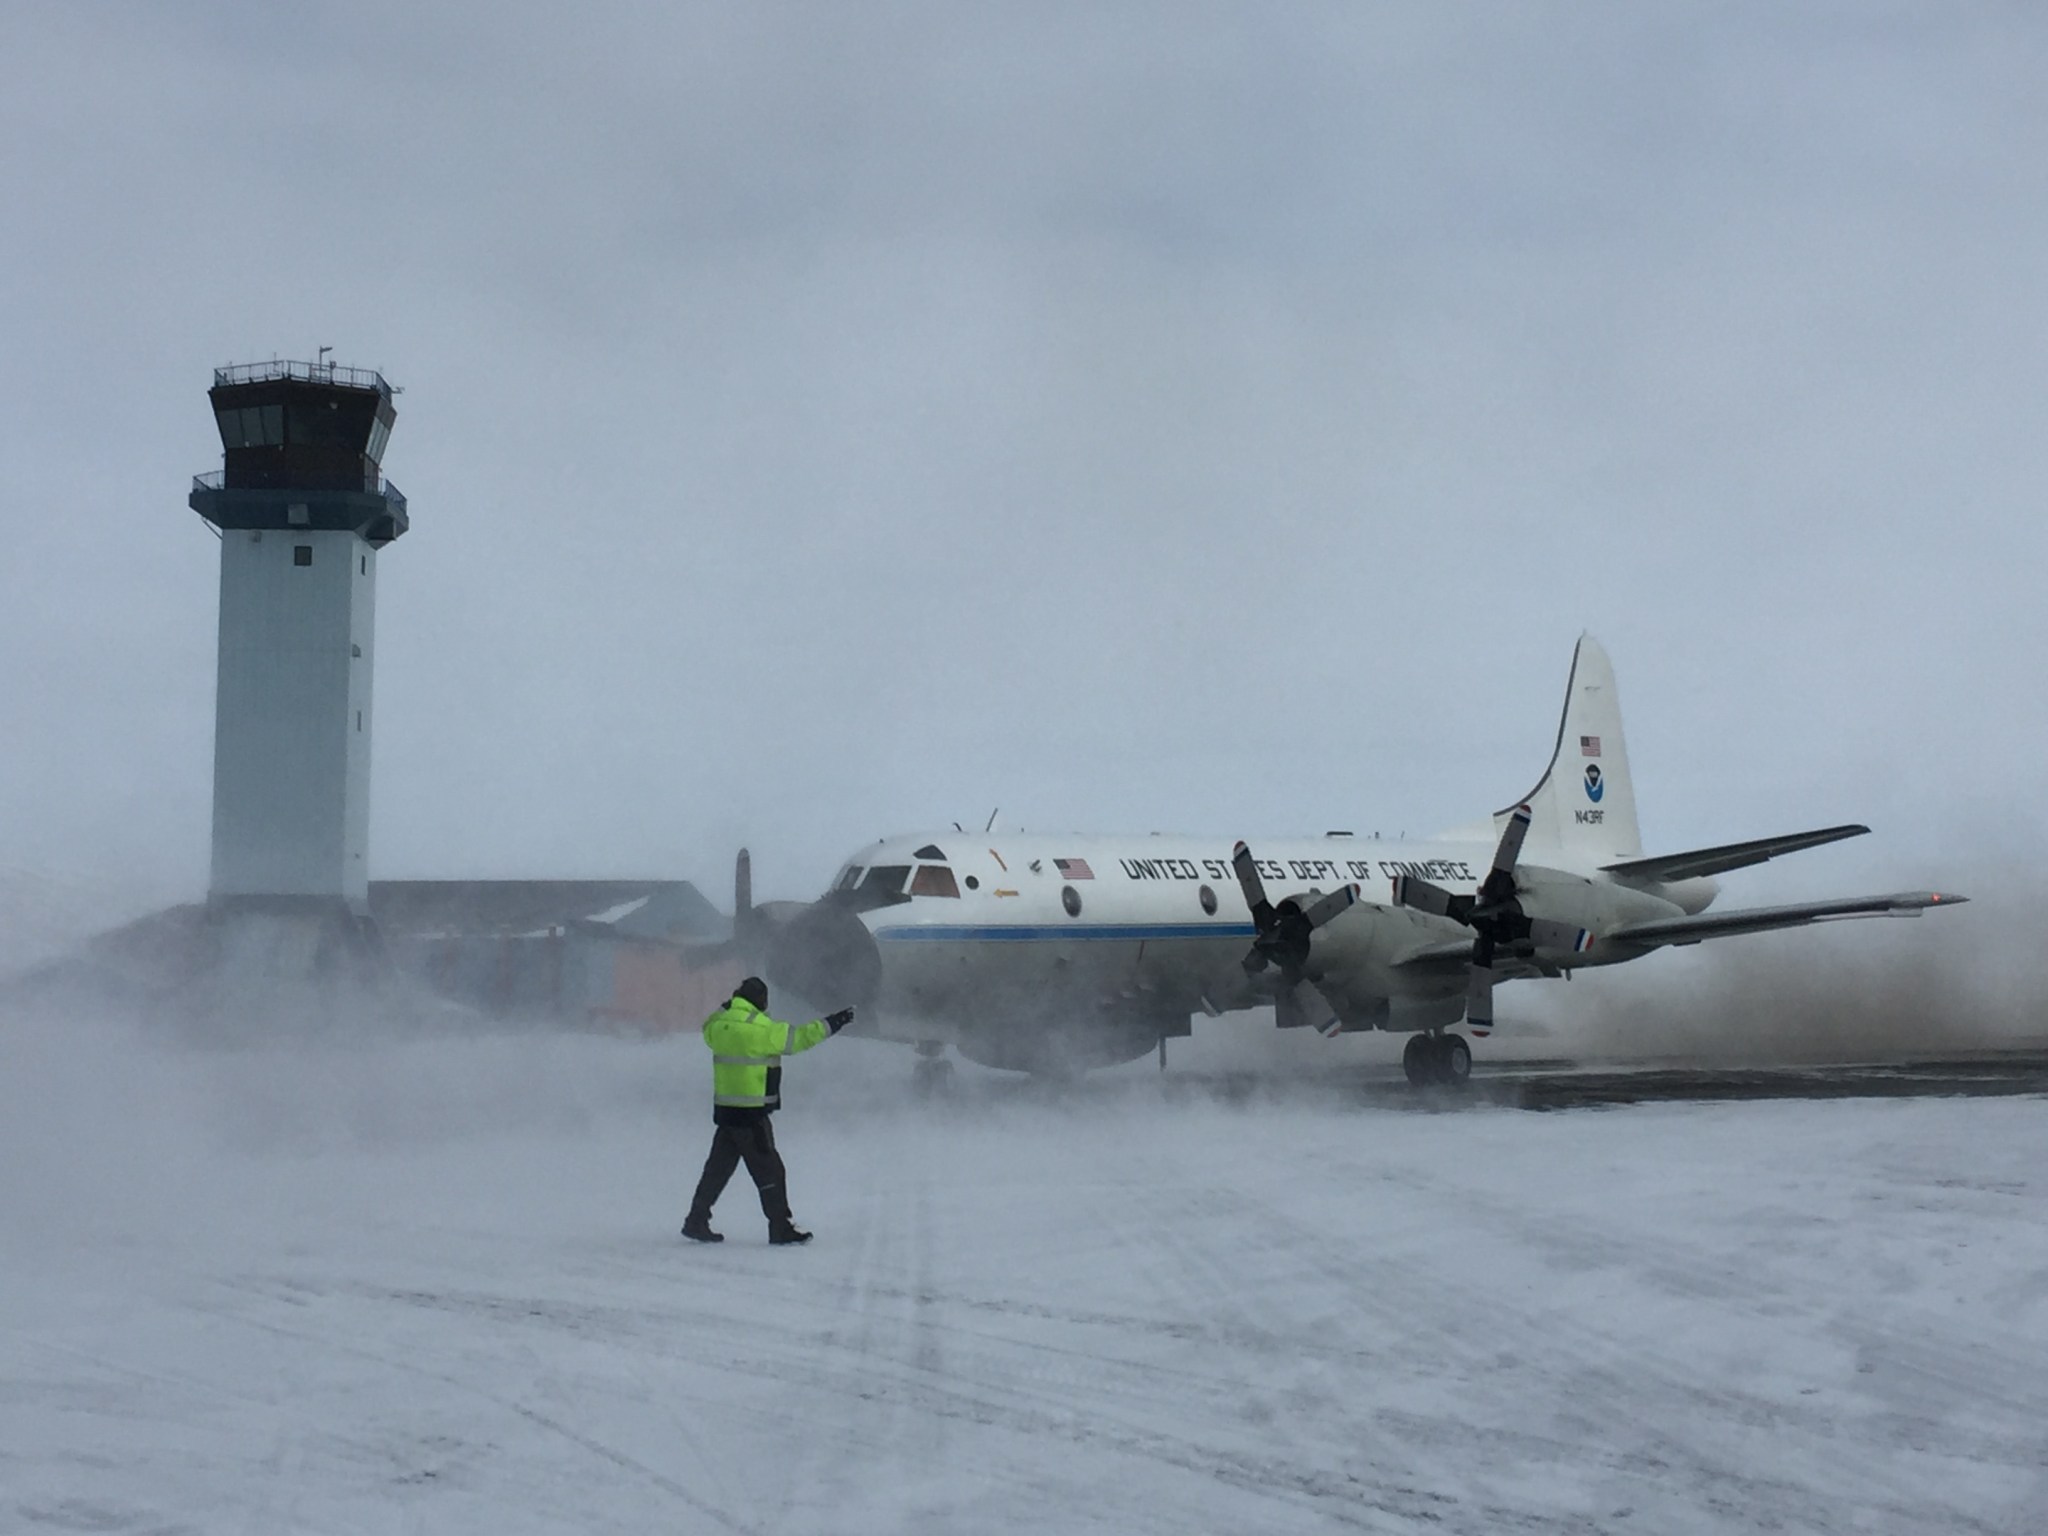 Plane taxis near tower on ice runway